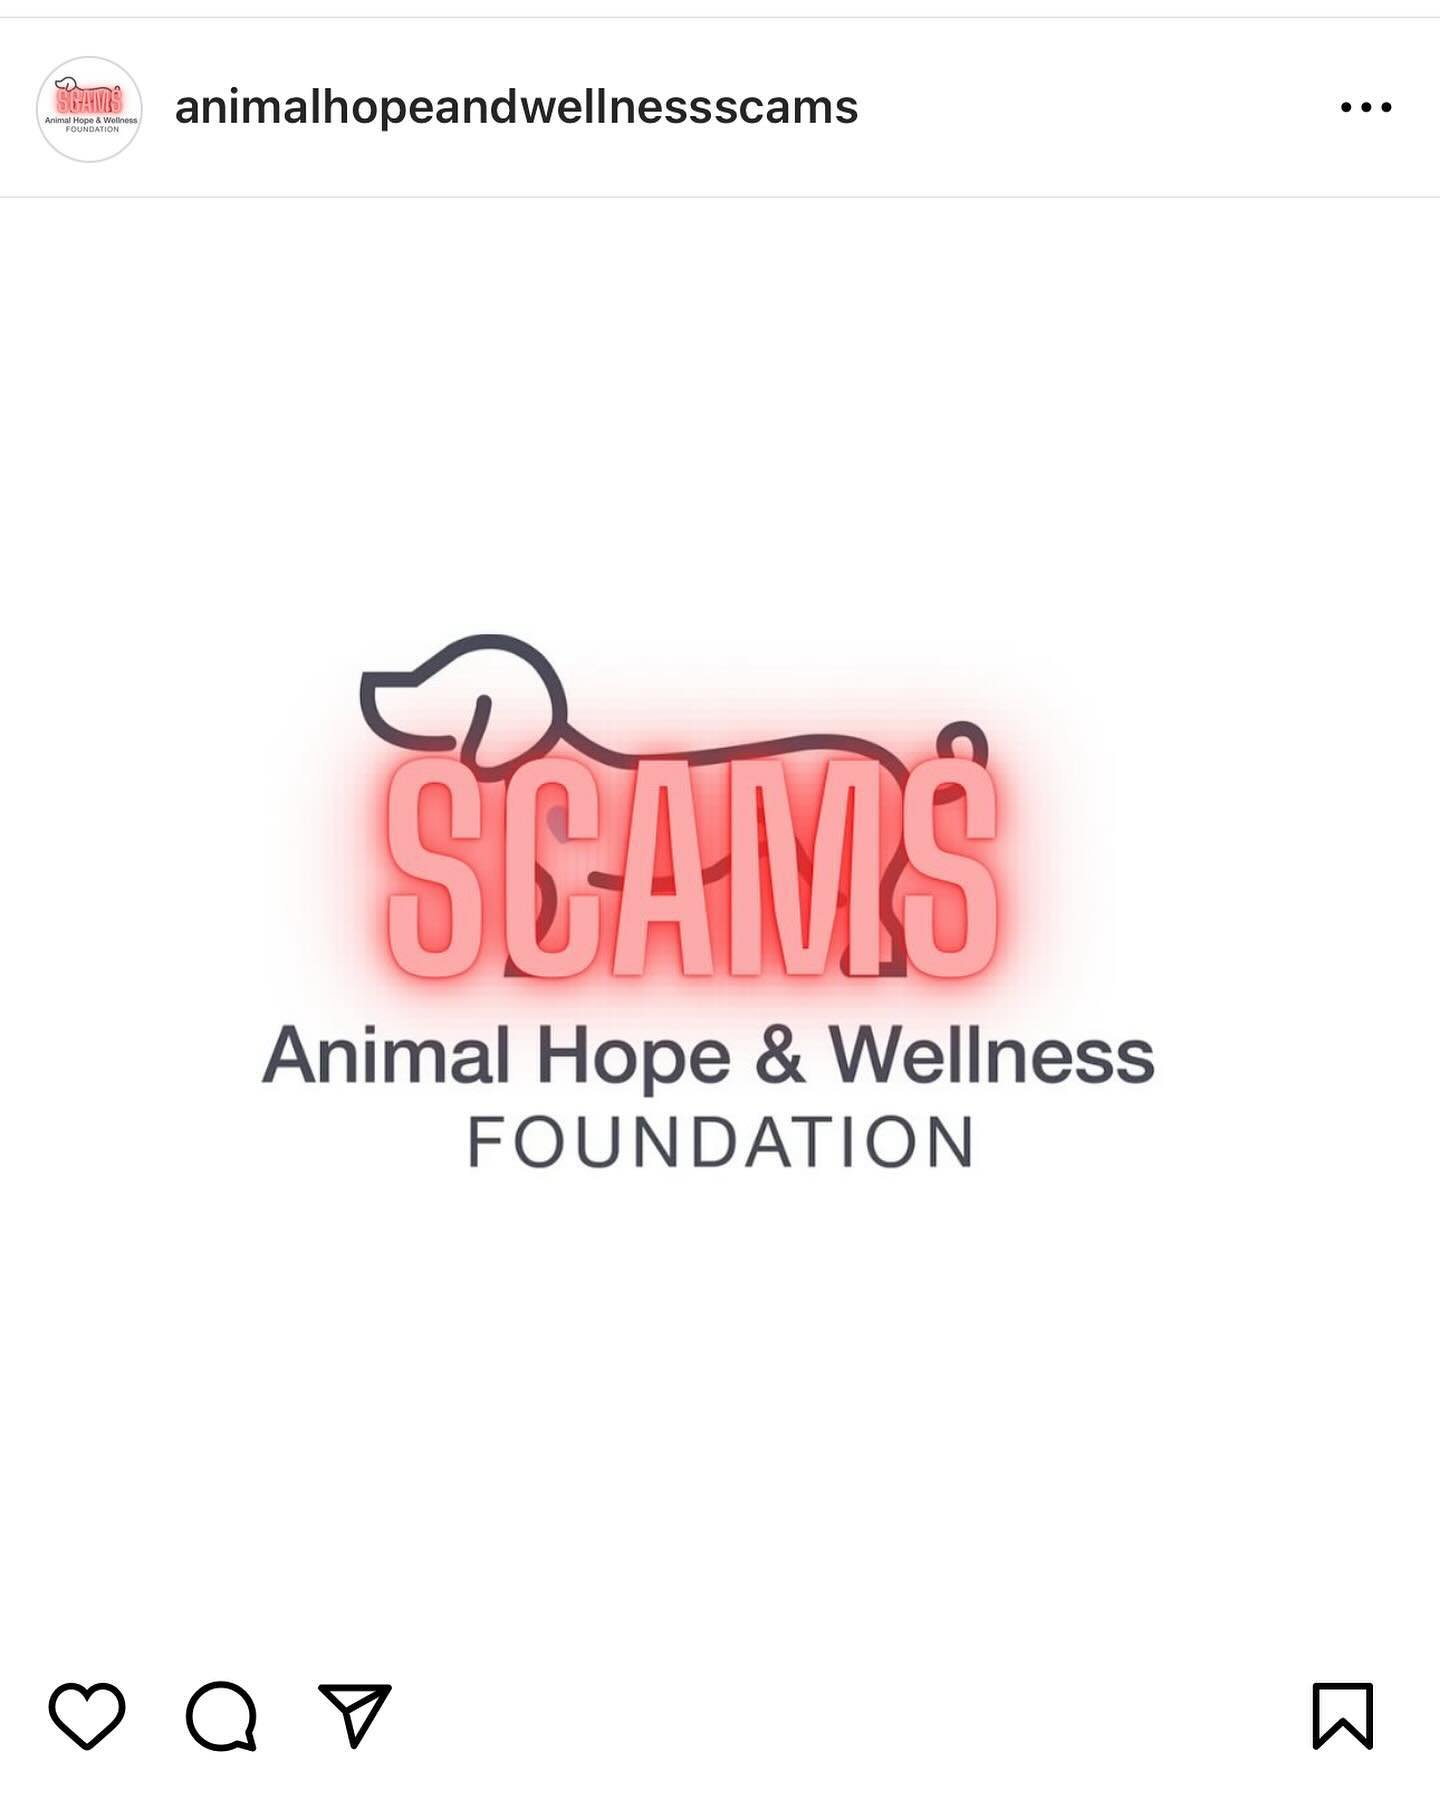 Give this @animalhopeandwellnessscams a follow and check out their website. Animal Hope and wellness  need to be exposed they haven&rsquo;t stopped abusing and using animals for donations!! 

#animalhopeandwellness  #animalhopeandwellnessscams #march